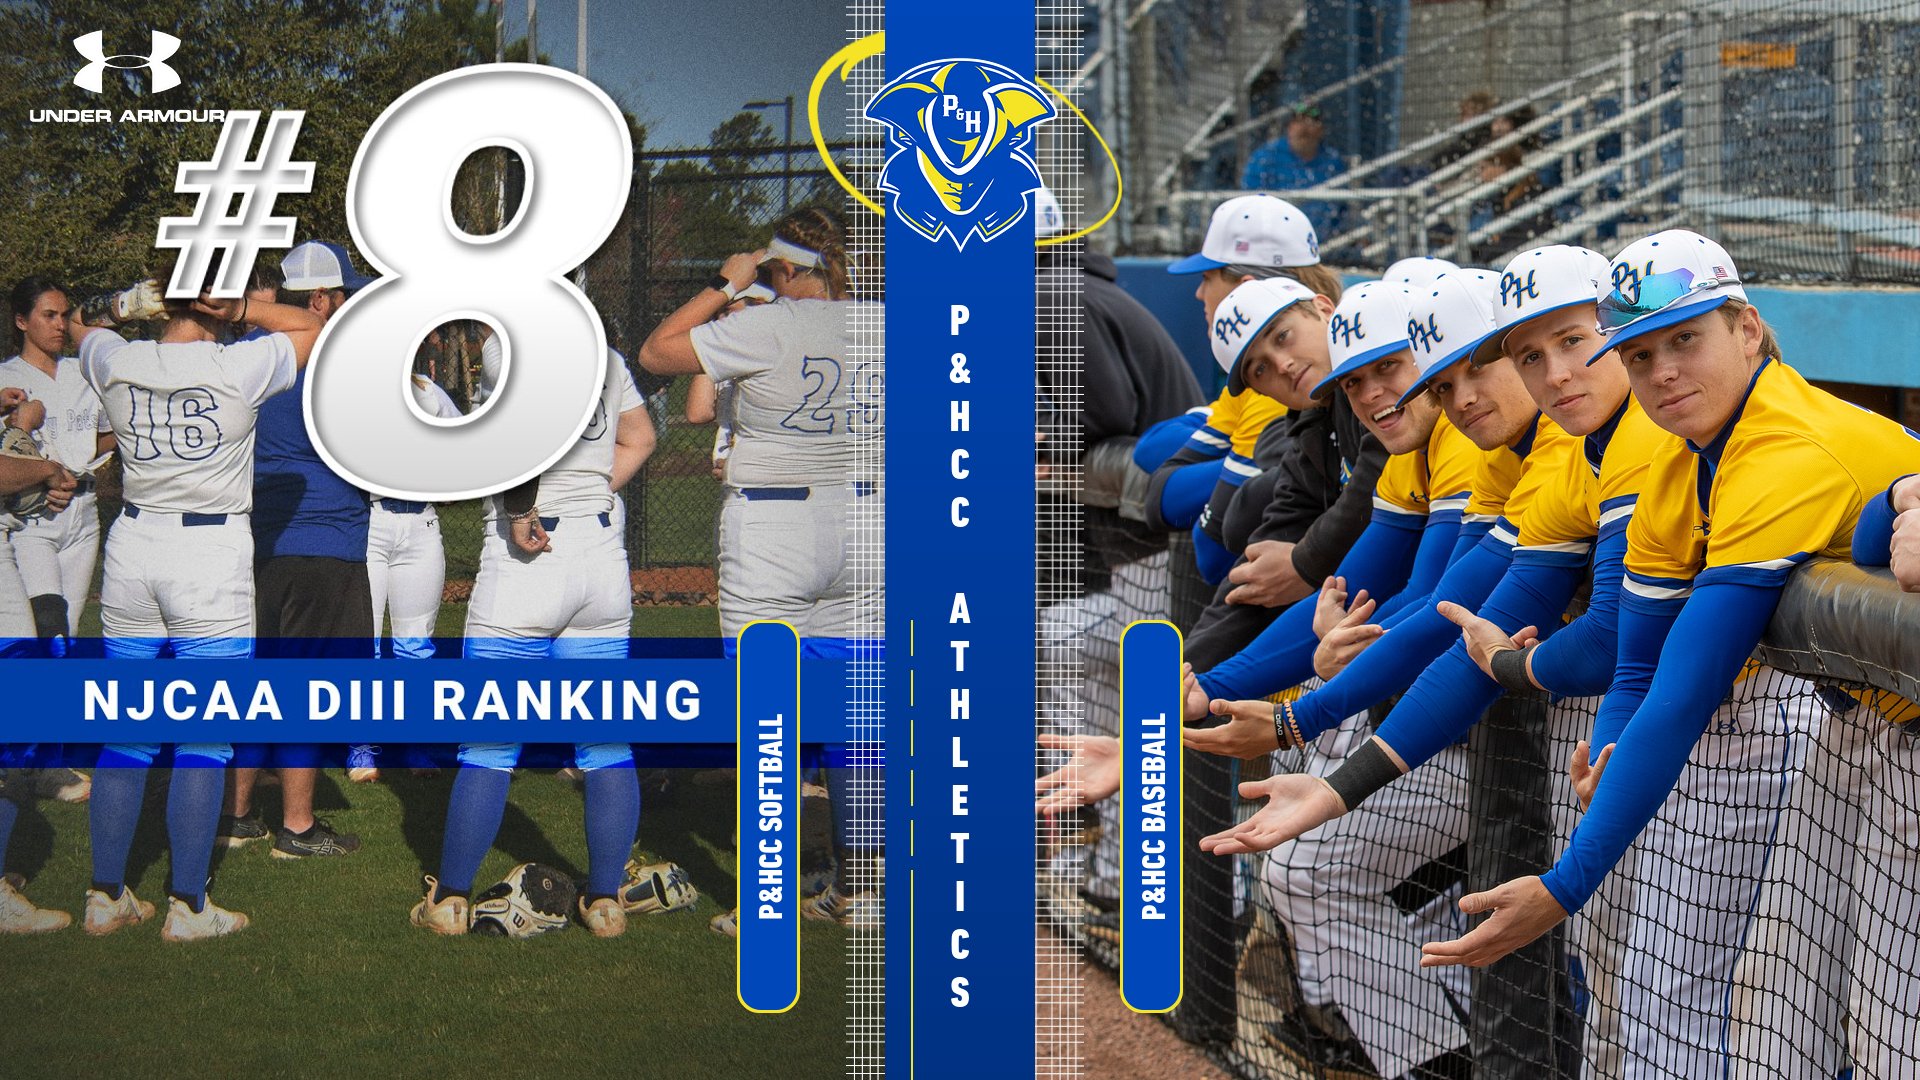 P&HCC Softball Climbs to No. 8 in Rankings, Baseball Knocks Off Back-to-Back No. 1 Opponents